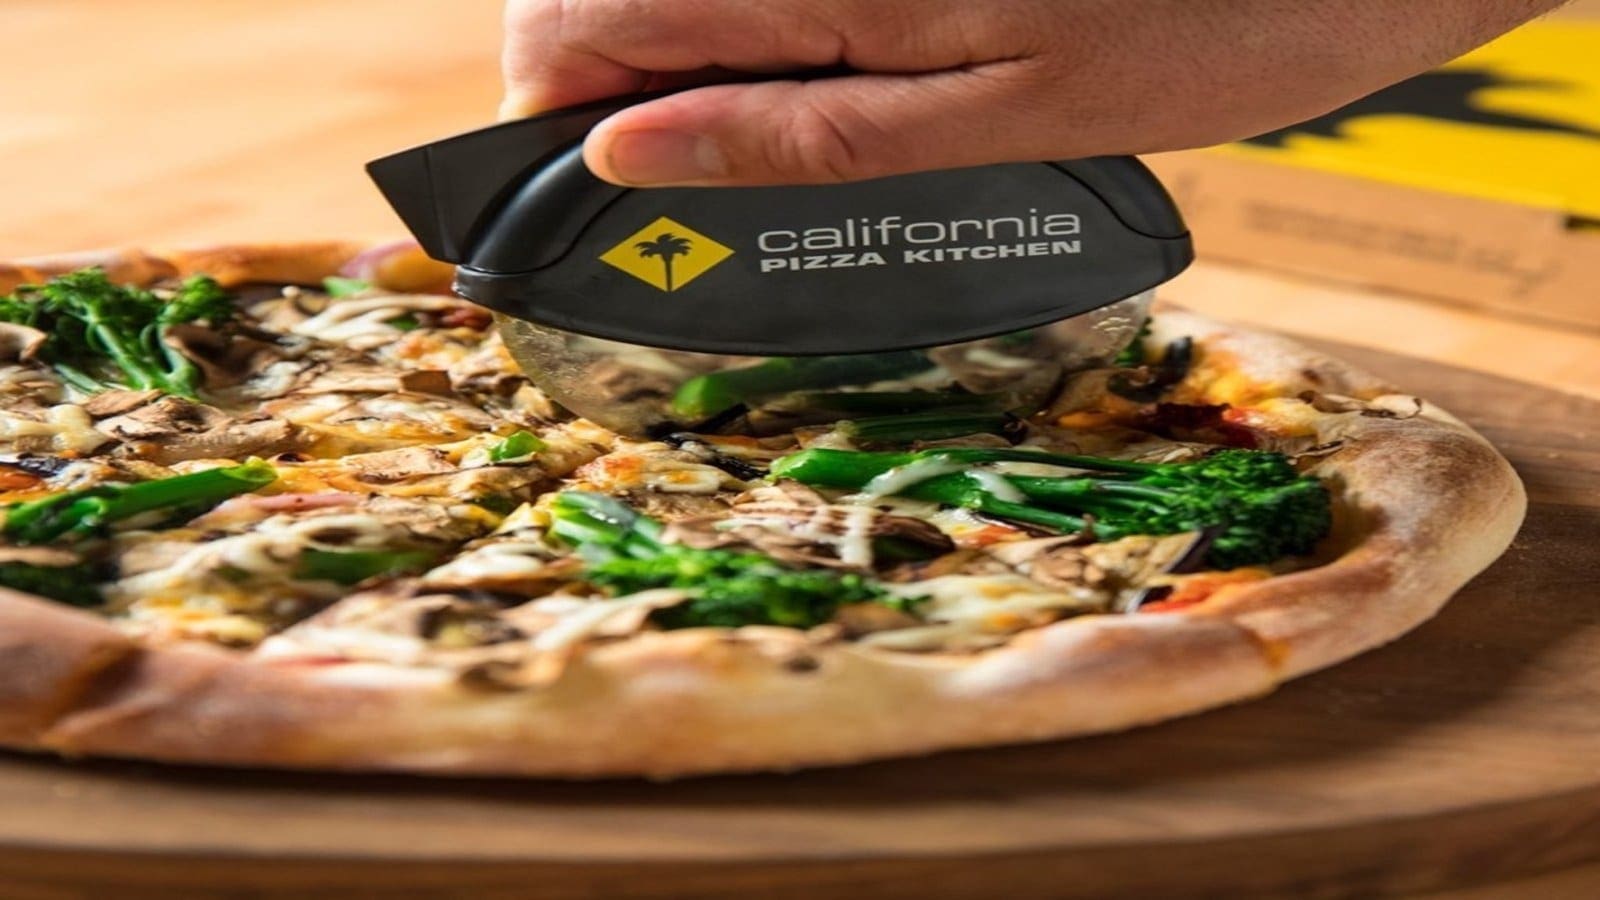 California Pizza Kitchen fights to regain selling rights to frozen line from Nestlé